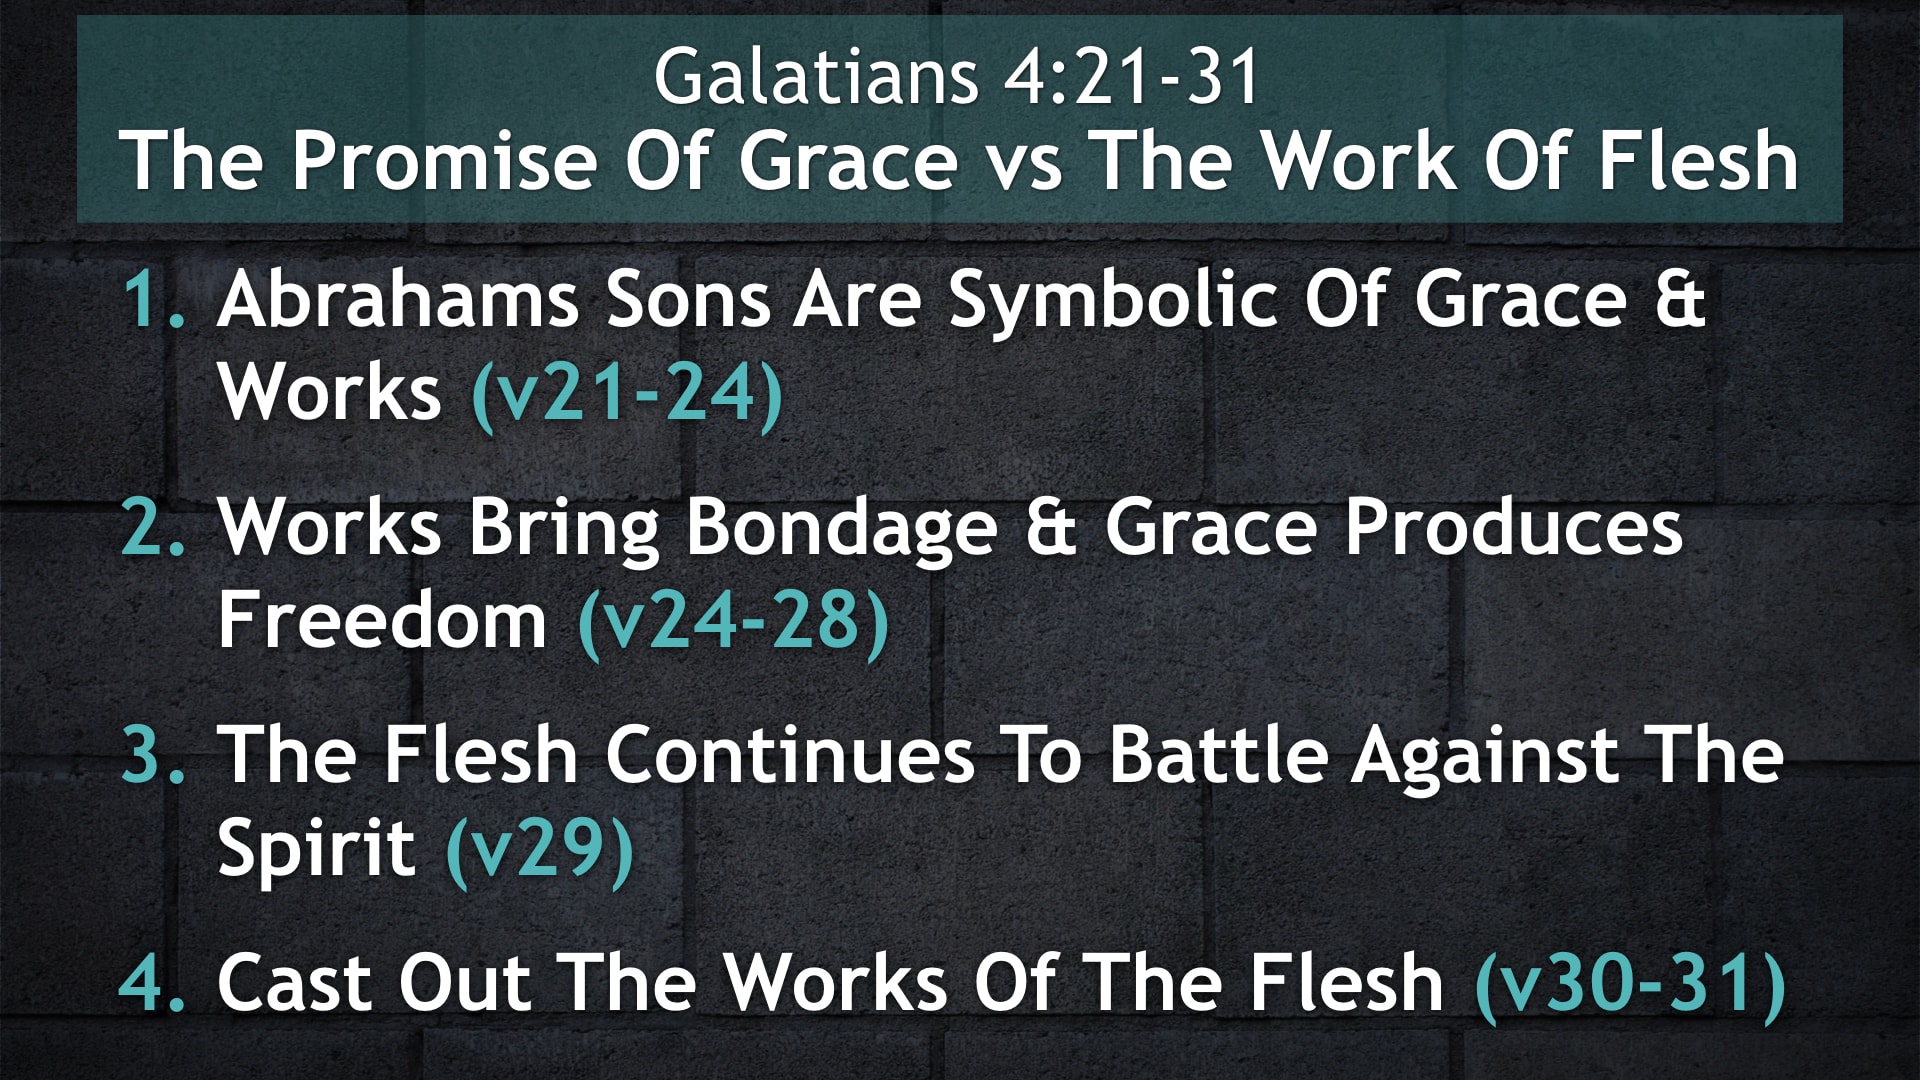 Jerry Simmons teaching Galatians 4:21-31, The Promise Of Grace vs The Work Of Flesh